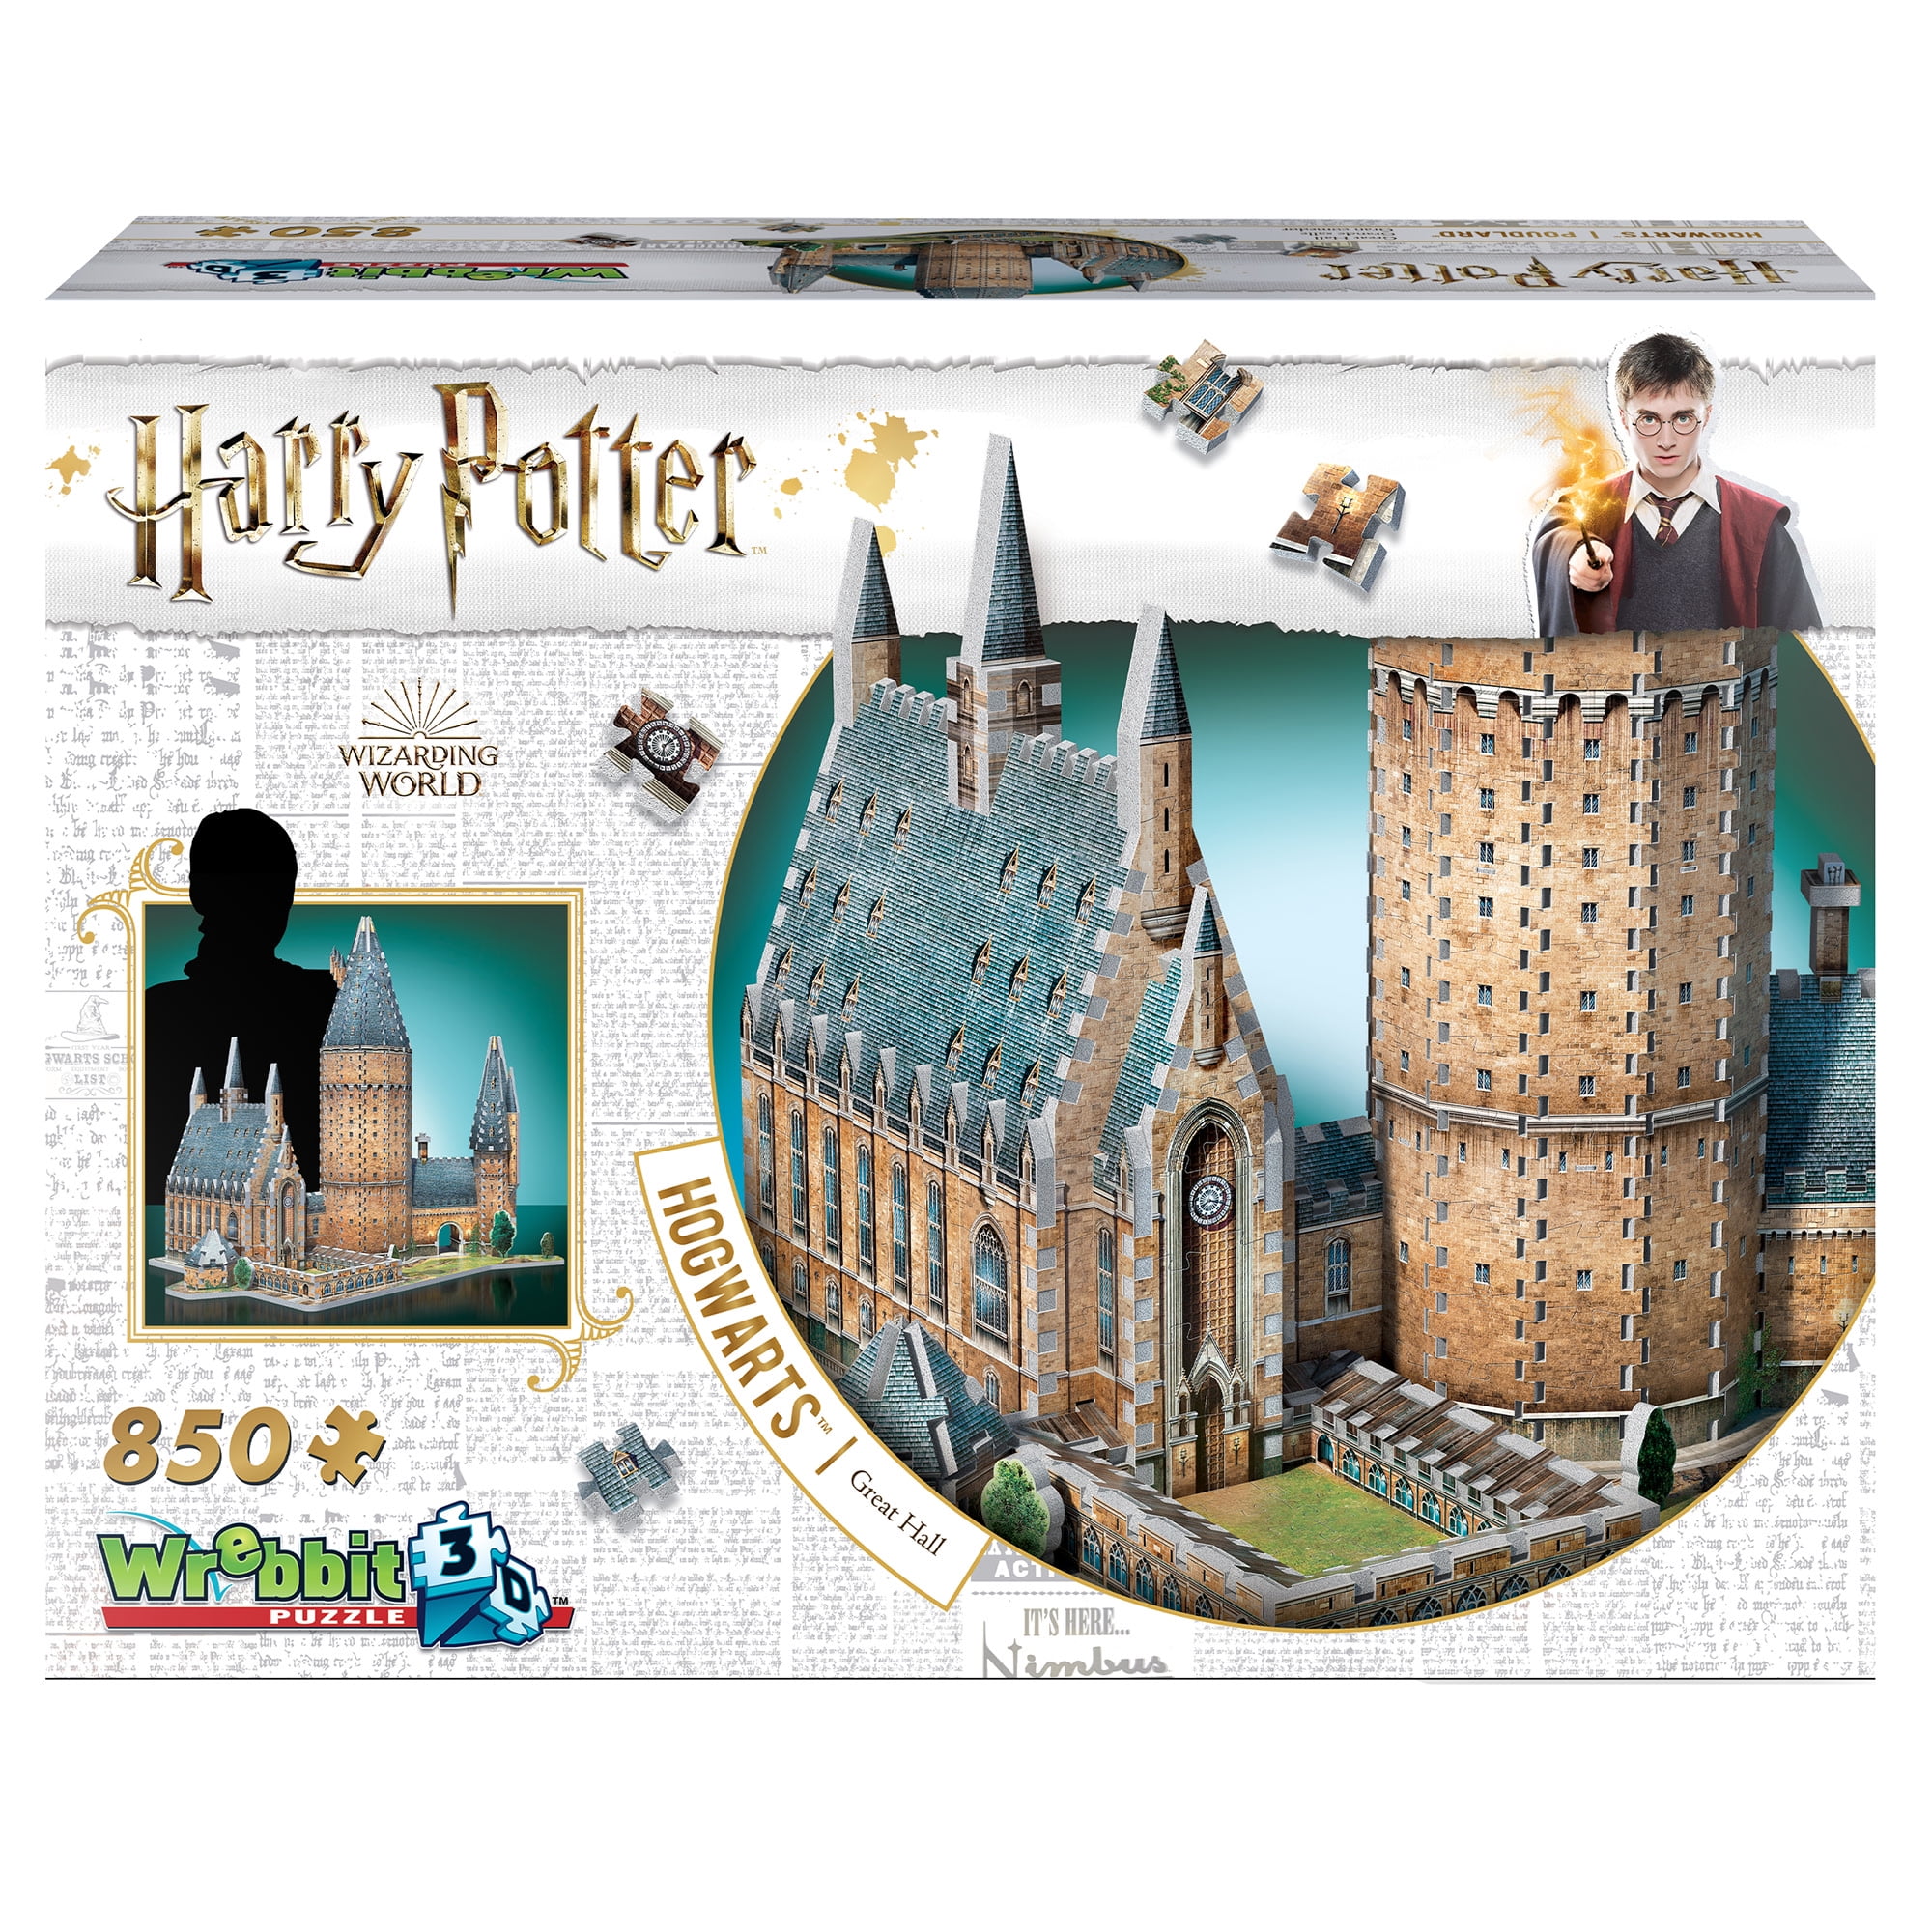 31734 HARRY POTTER THE BURROW WEASLEY HOME 415 PIECE WREBBIT 3D JIGSAW PUZZLE 